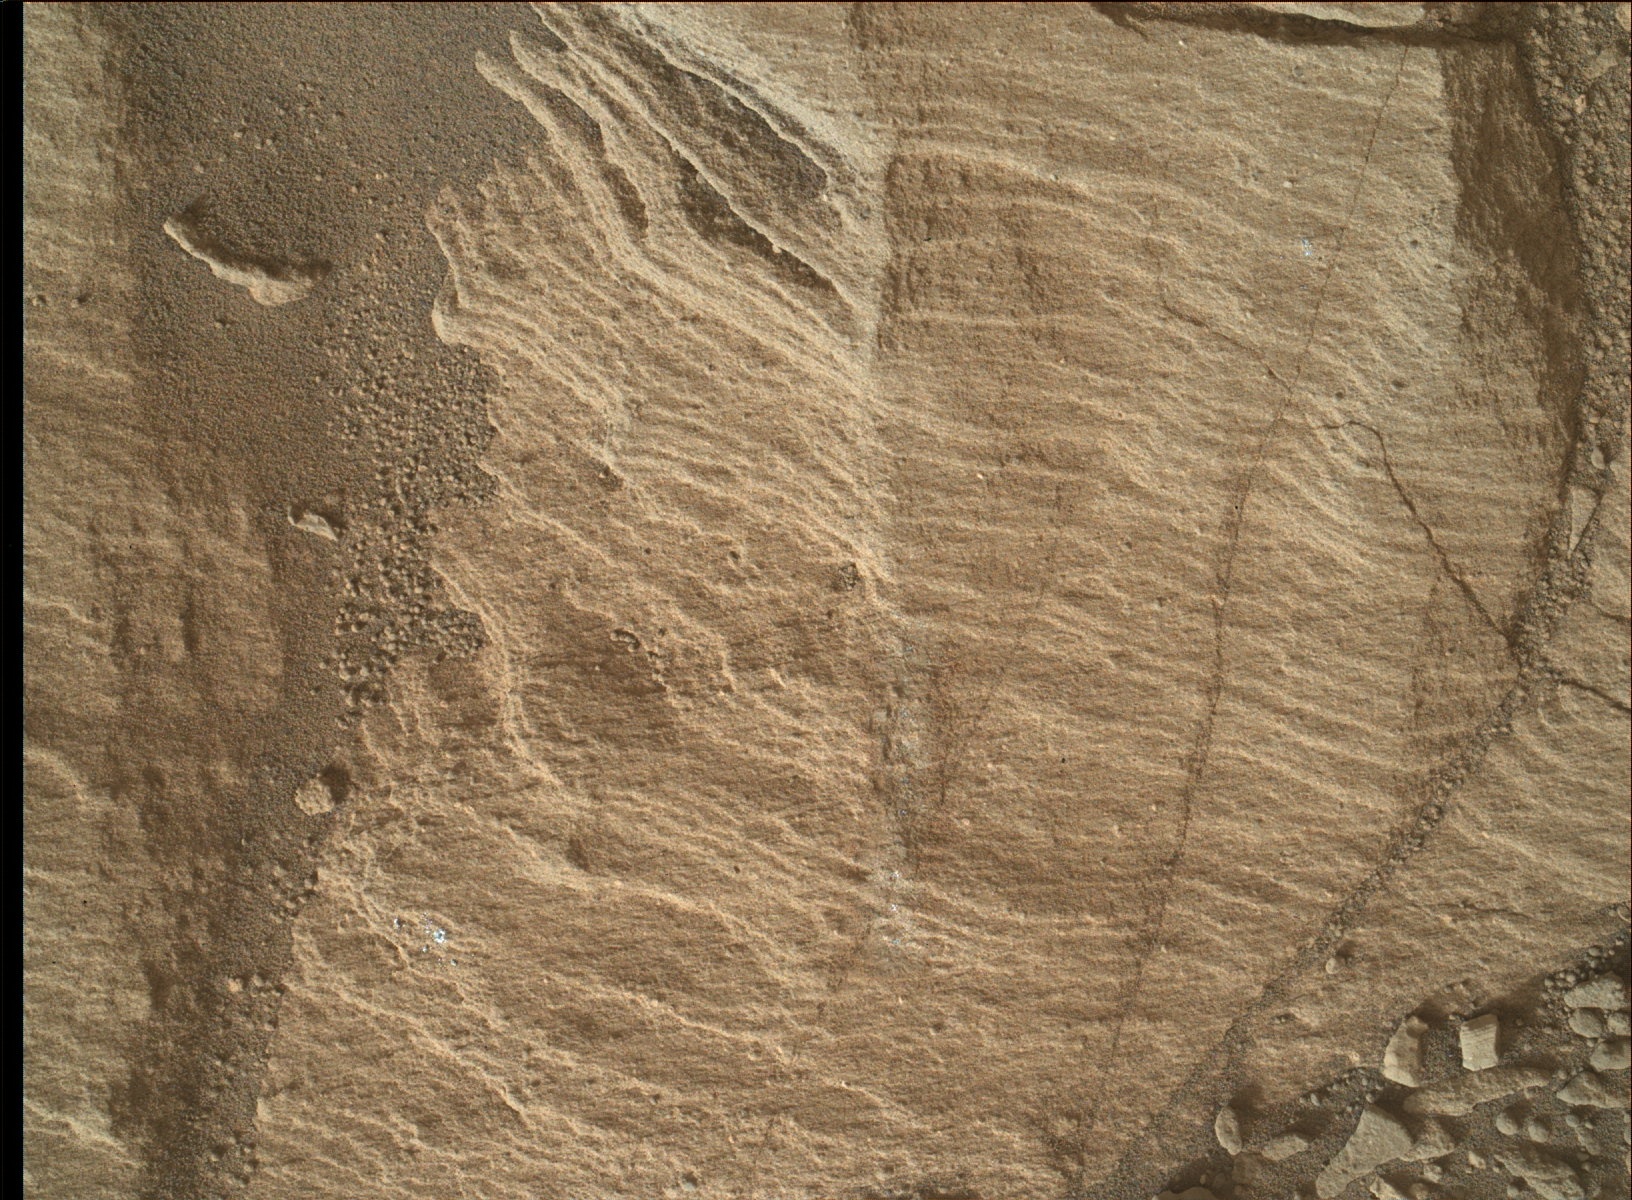 Nasa's Mars rover Curiosity acquired this image using its Mars Hand Lens Imager (MAHLI) on Sol 1130